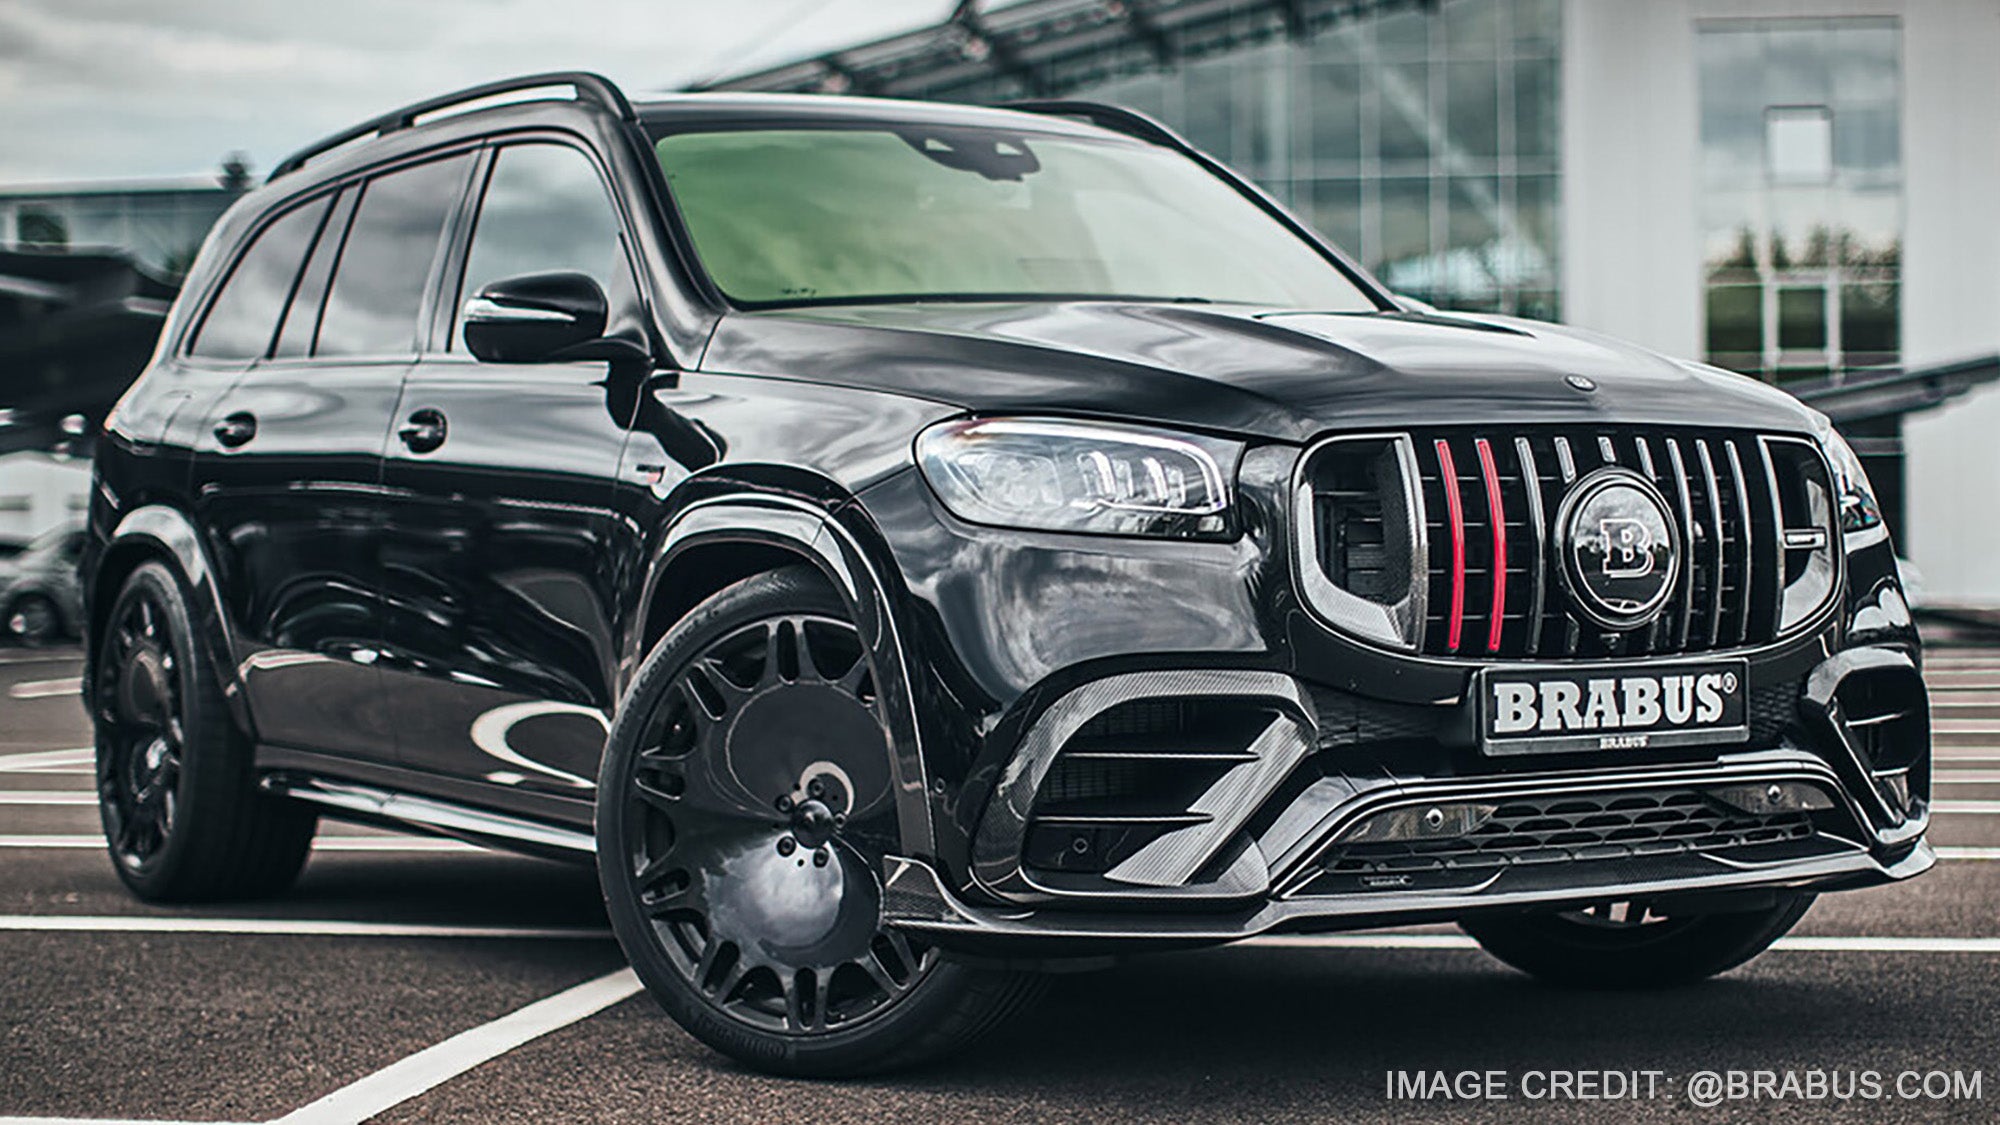 The Brabus ROCKET GLS800 is a highperformance SUV it can go from 0 to 60 mph in just 3.8 seconds and reach the top speed